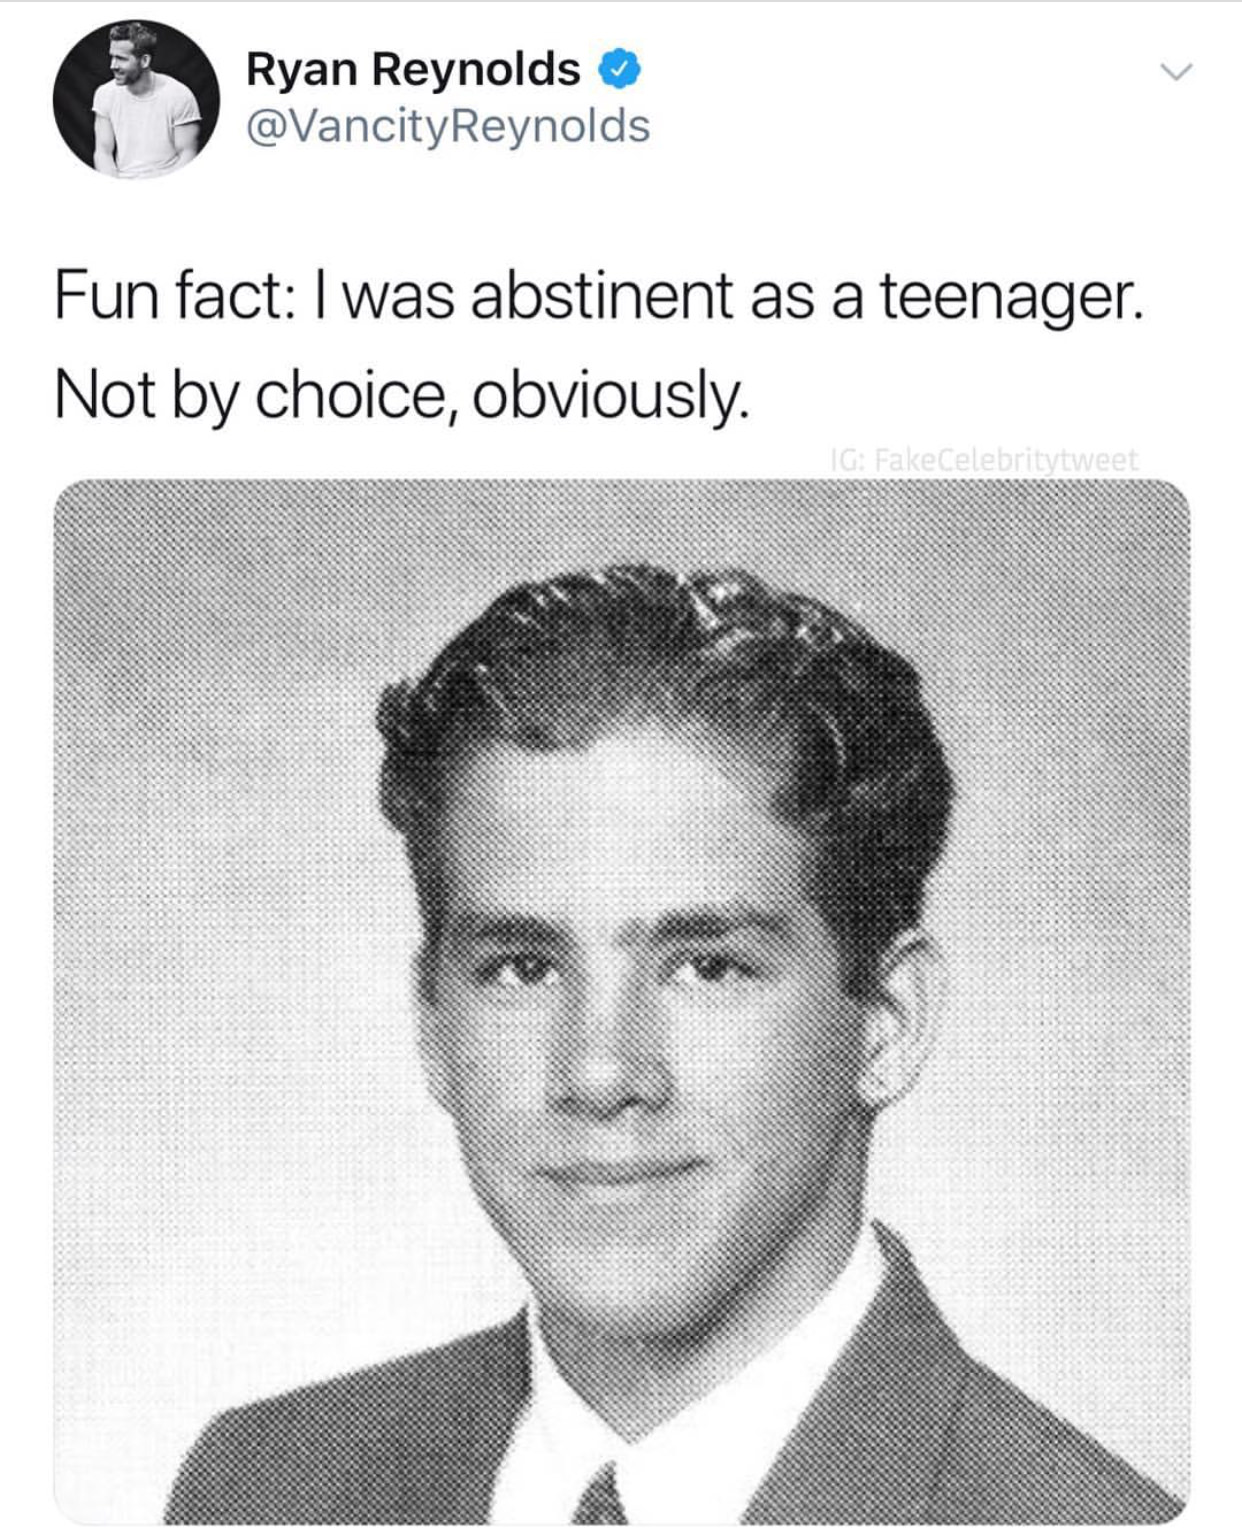 ryan reynolds yearbook - Ryan Reynolds Fun fact I was abstinent as a teenager. Not by choice, obviously. Ig Fake Celebritytweet